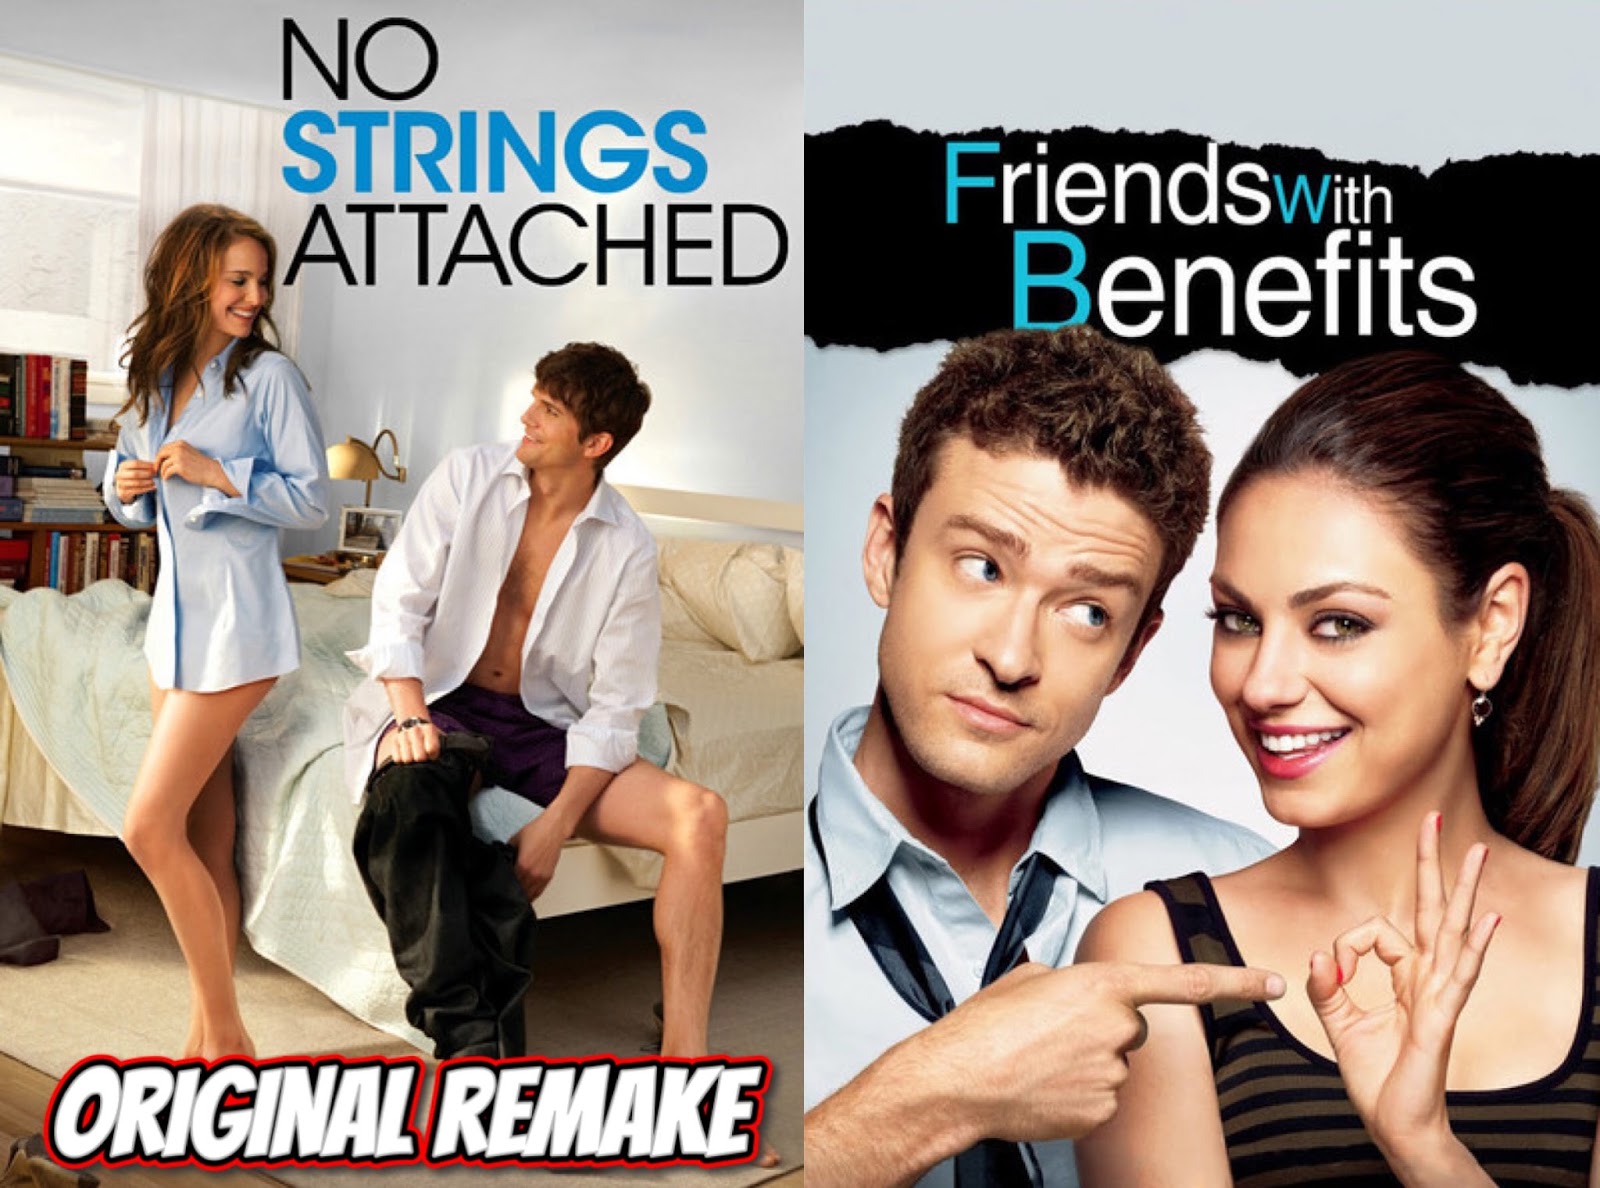 Original Remake No Strings Attached And Friends With Benefits